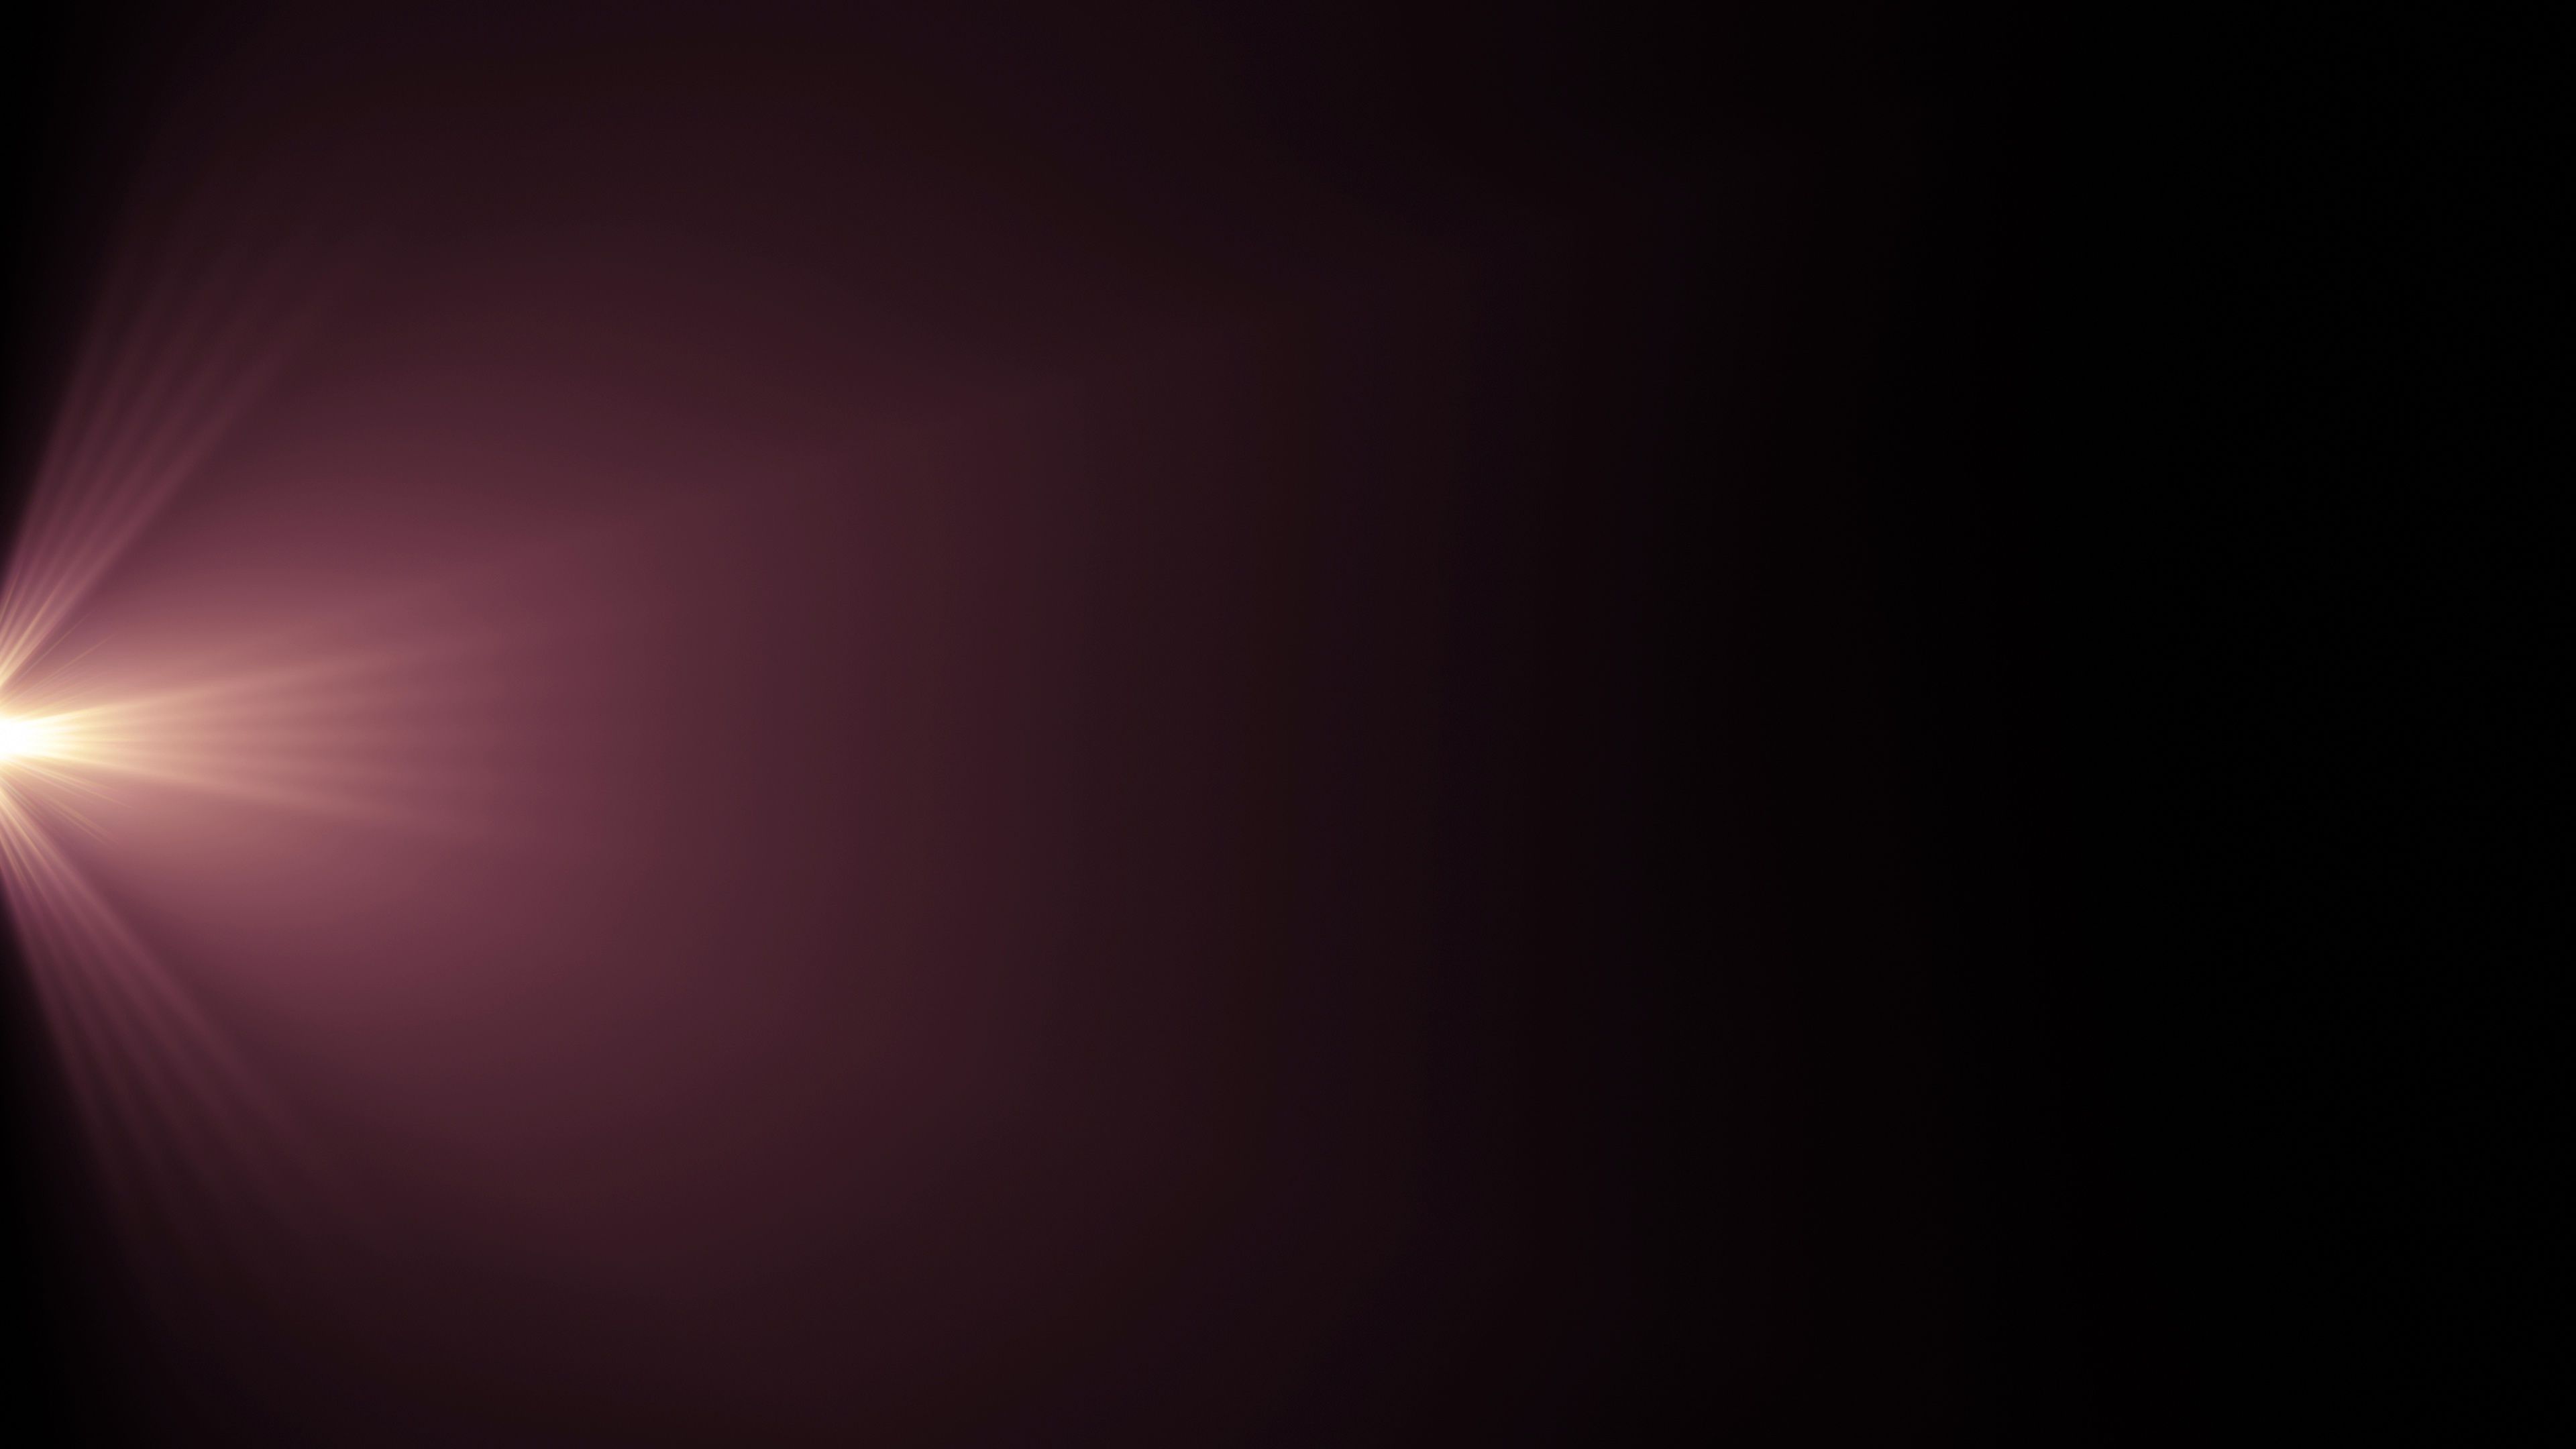 Explosion Flash Side Rays Transition Overlay Lights - Darkness , HD Wallpaper & Backgrounds